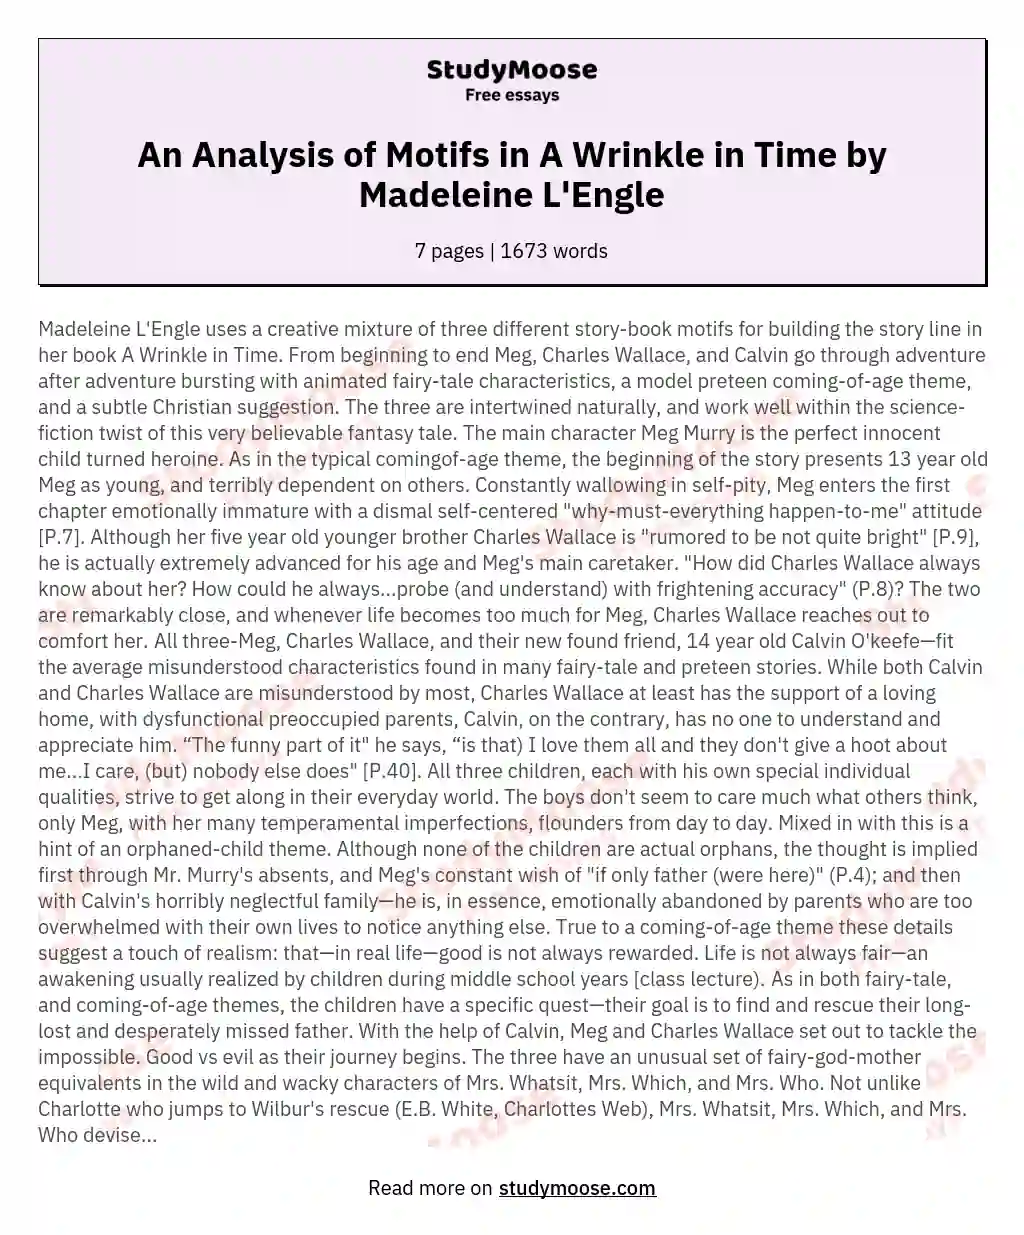 An Analysis of Motifs in A Wrinkle in Time by Madeleine L'Engle essay